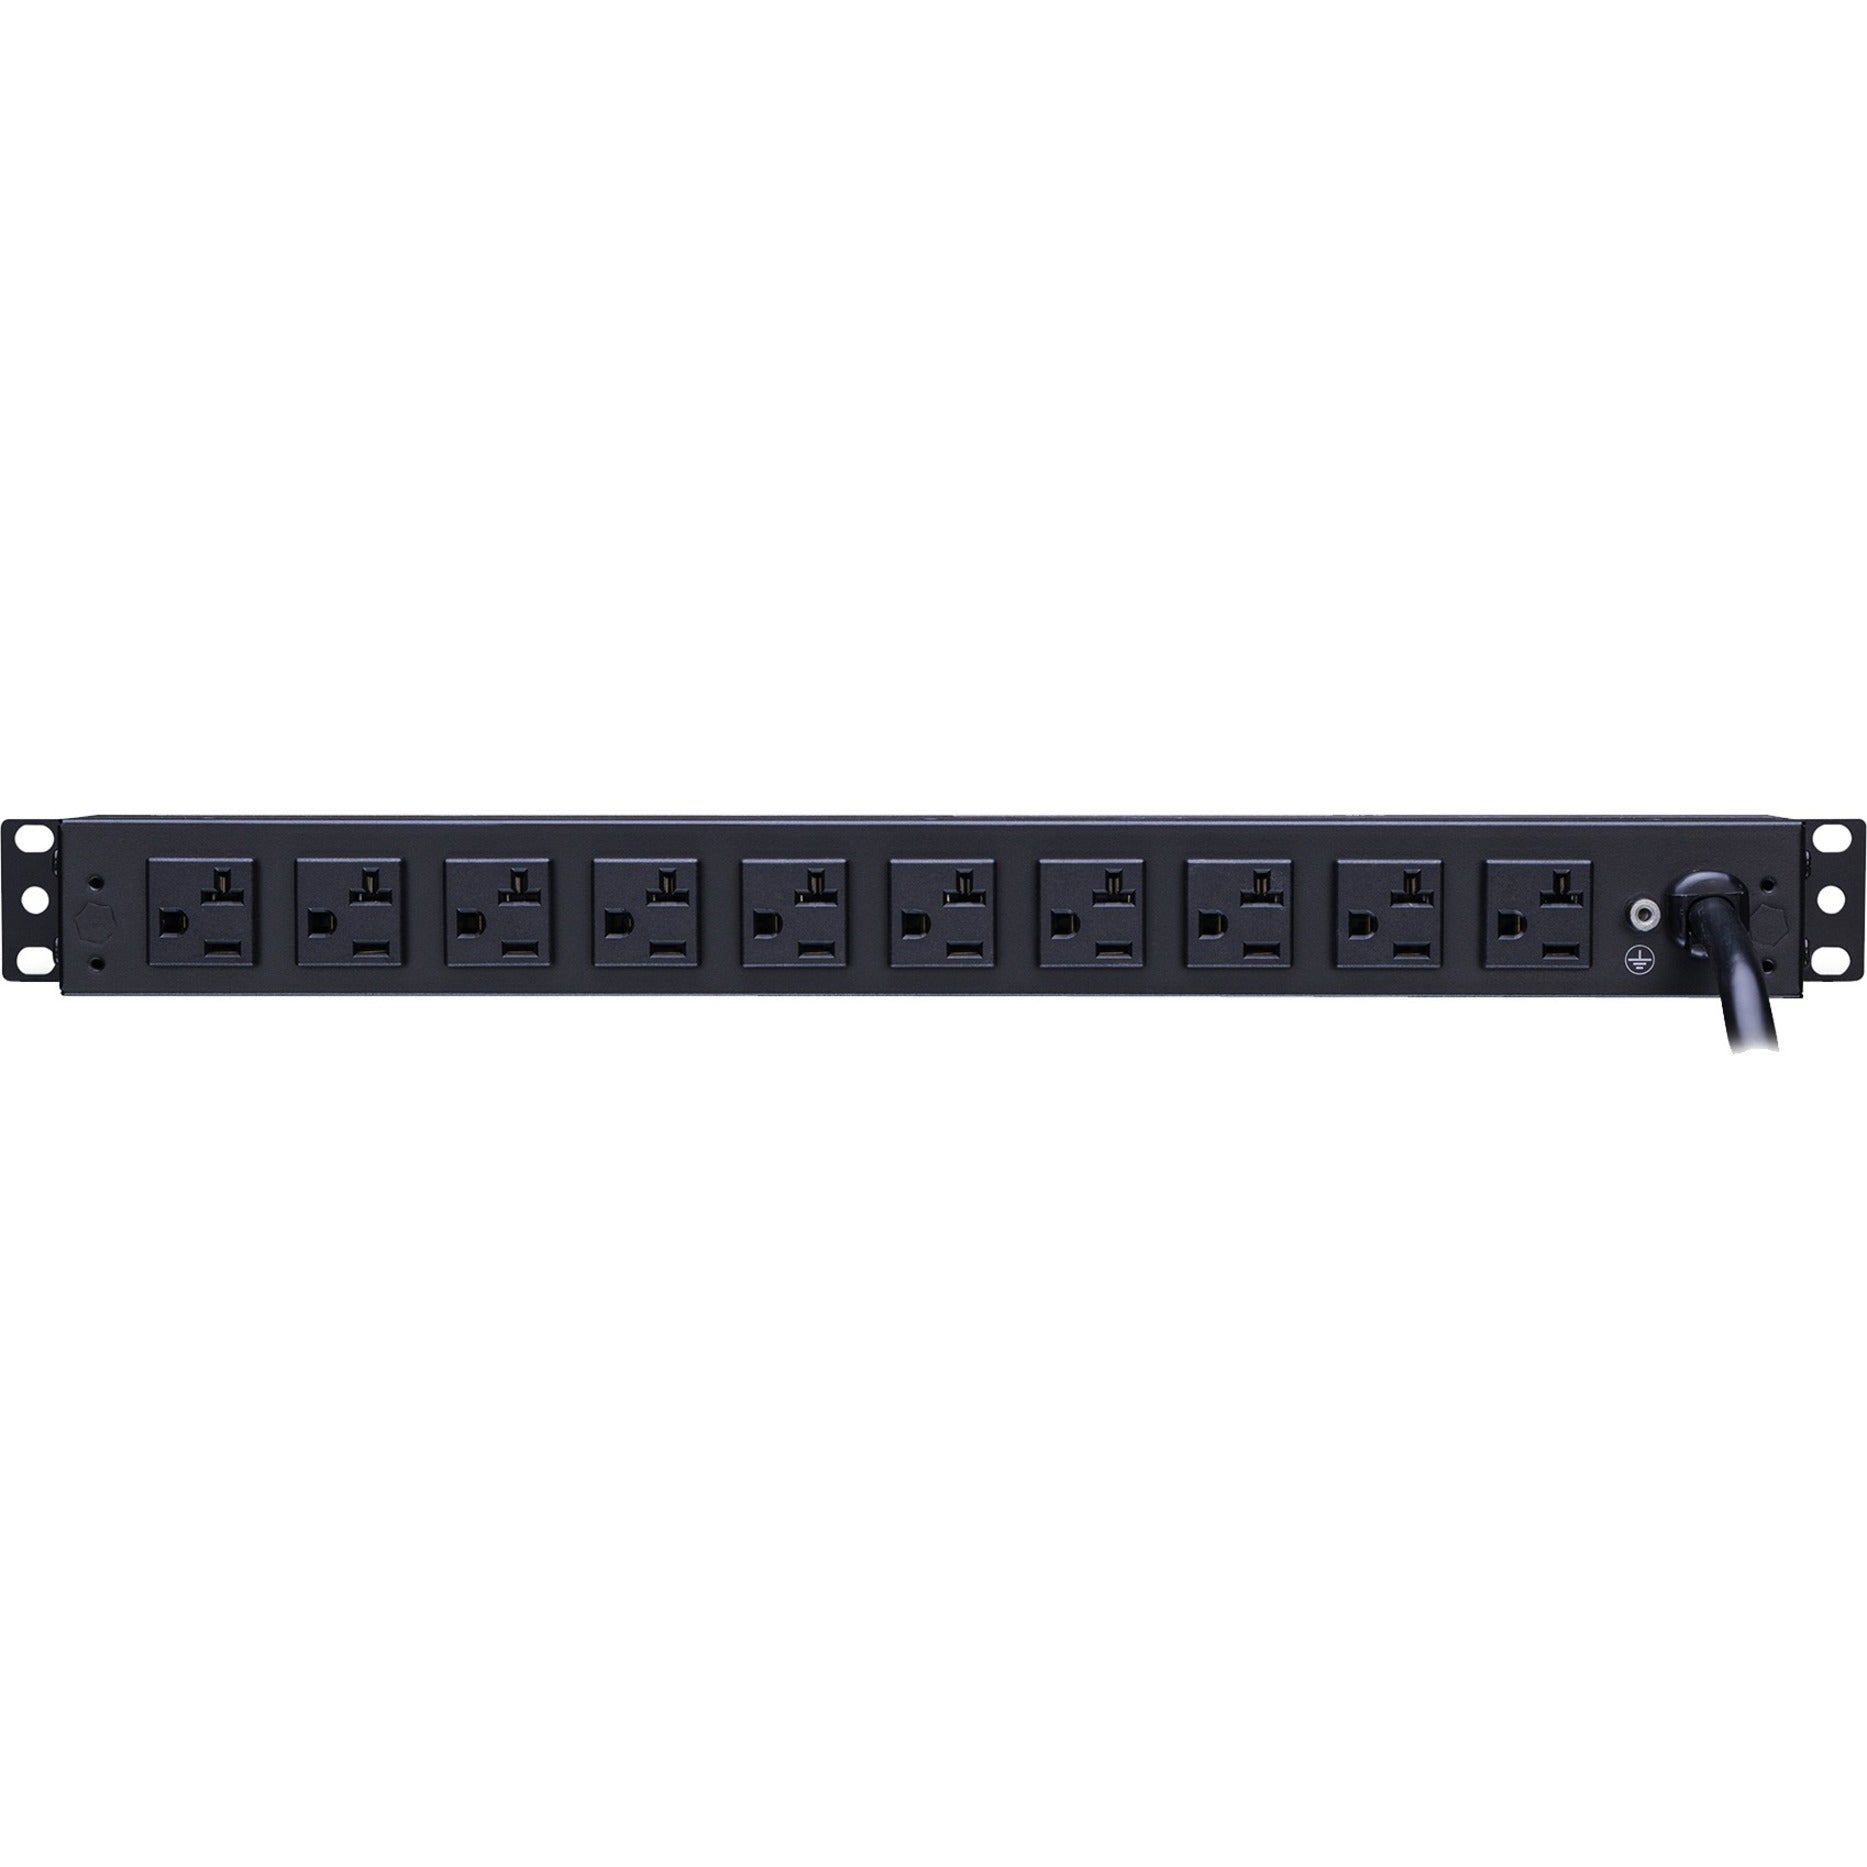 CyberPower PDU20MT2F10R Metered PDU 12-Outlets 20A 120V AC Rack-mountable CyberPower PDU20MT2F10R PDU mesuré 12 prises 20A 120V AC Montable en rack